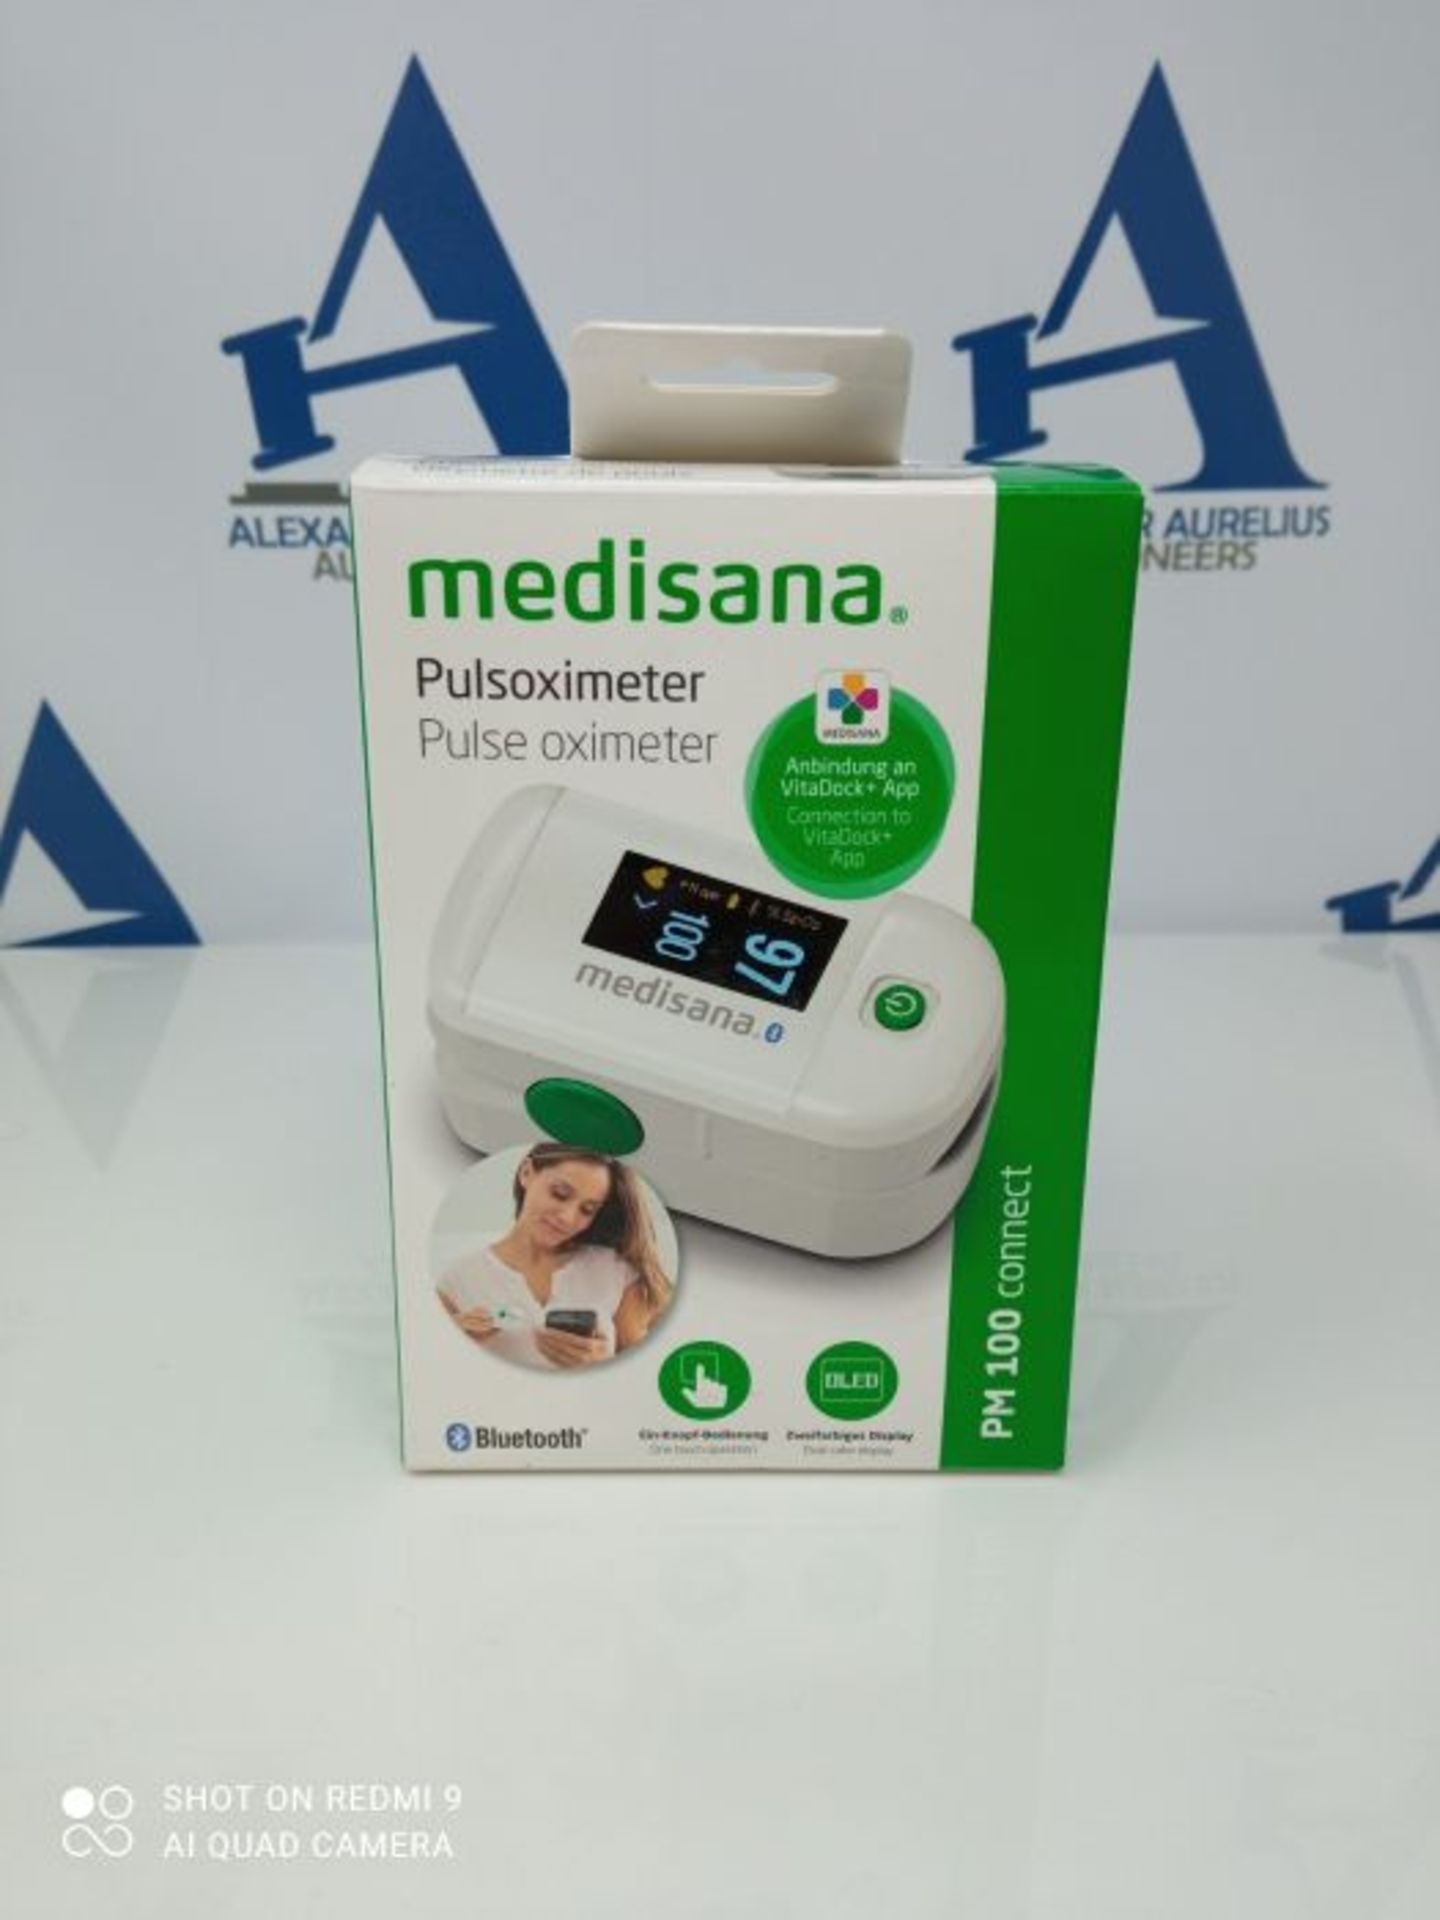 Medisana PM 100 Connect Pulse oximeter, 500 g, 79456 - Image 2 of 3